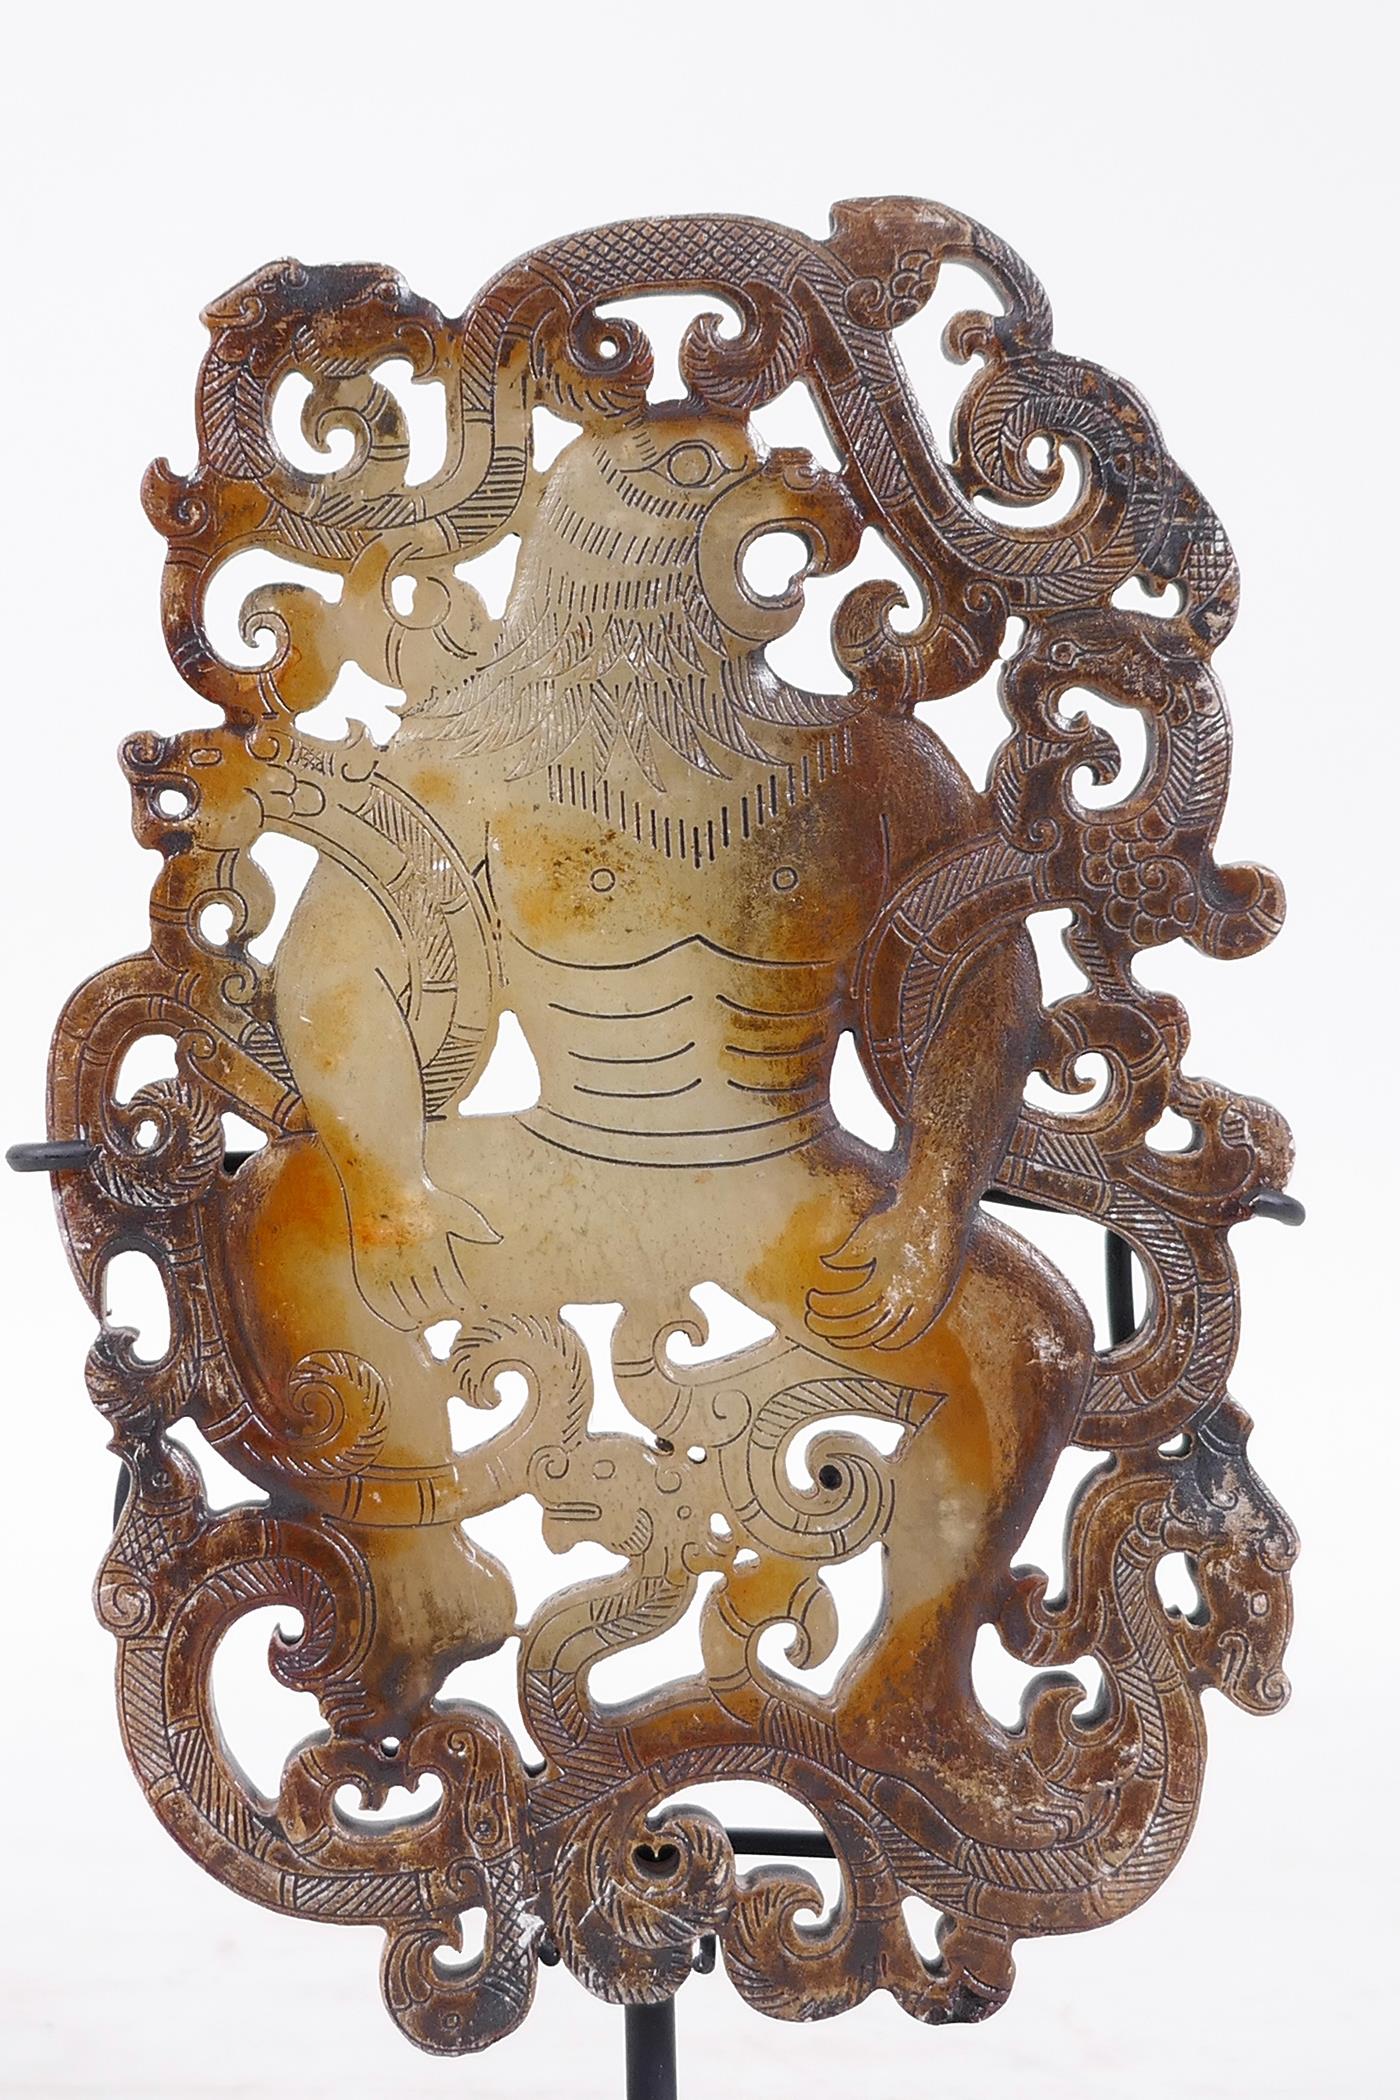 A Chinese pierced jade ornament, carved in the form of a bird headed man entwined with dragons, on a - Image 2 of 3